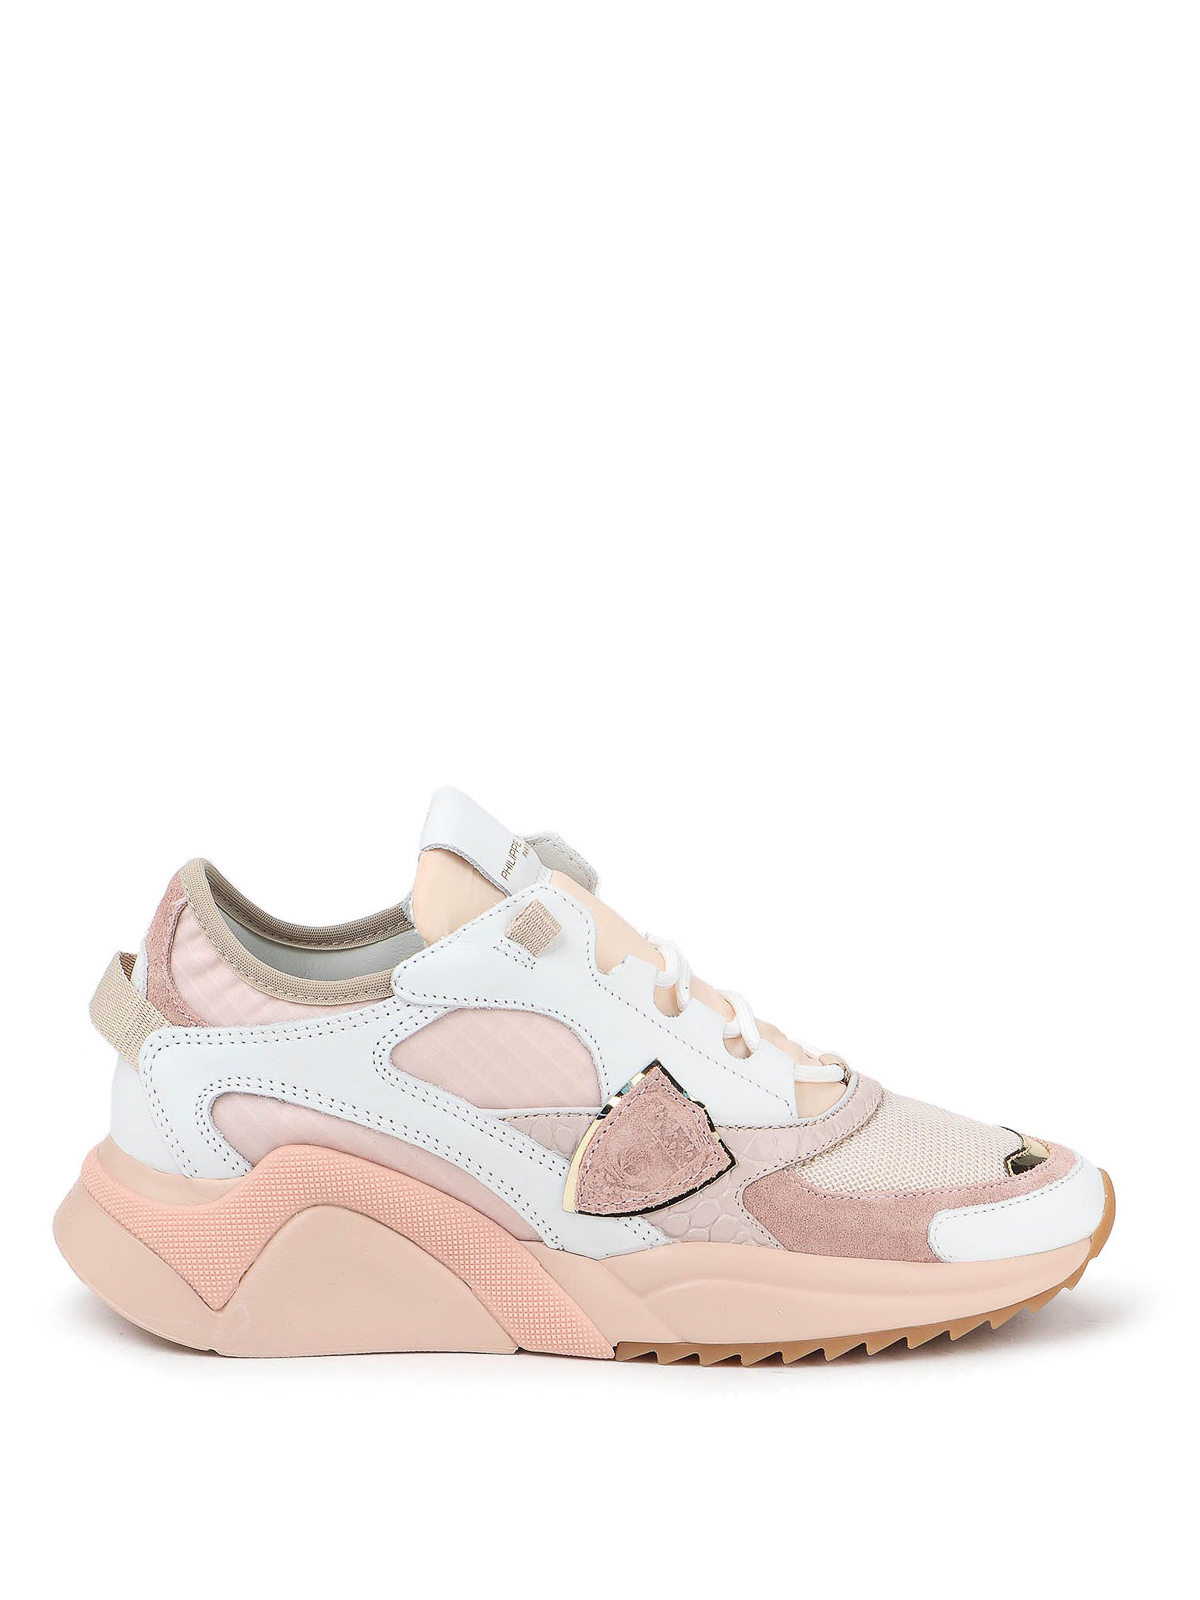 PHILIPPE MODEL EZE PINK AND WHITE SNEAKER